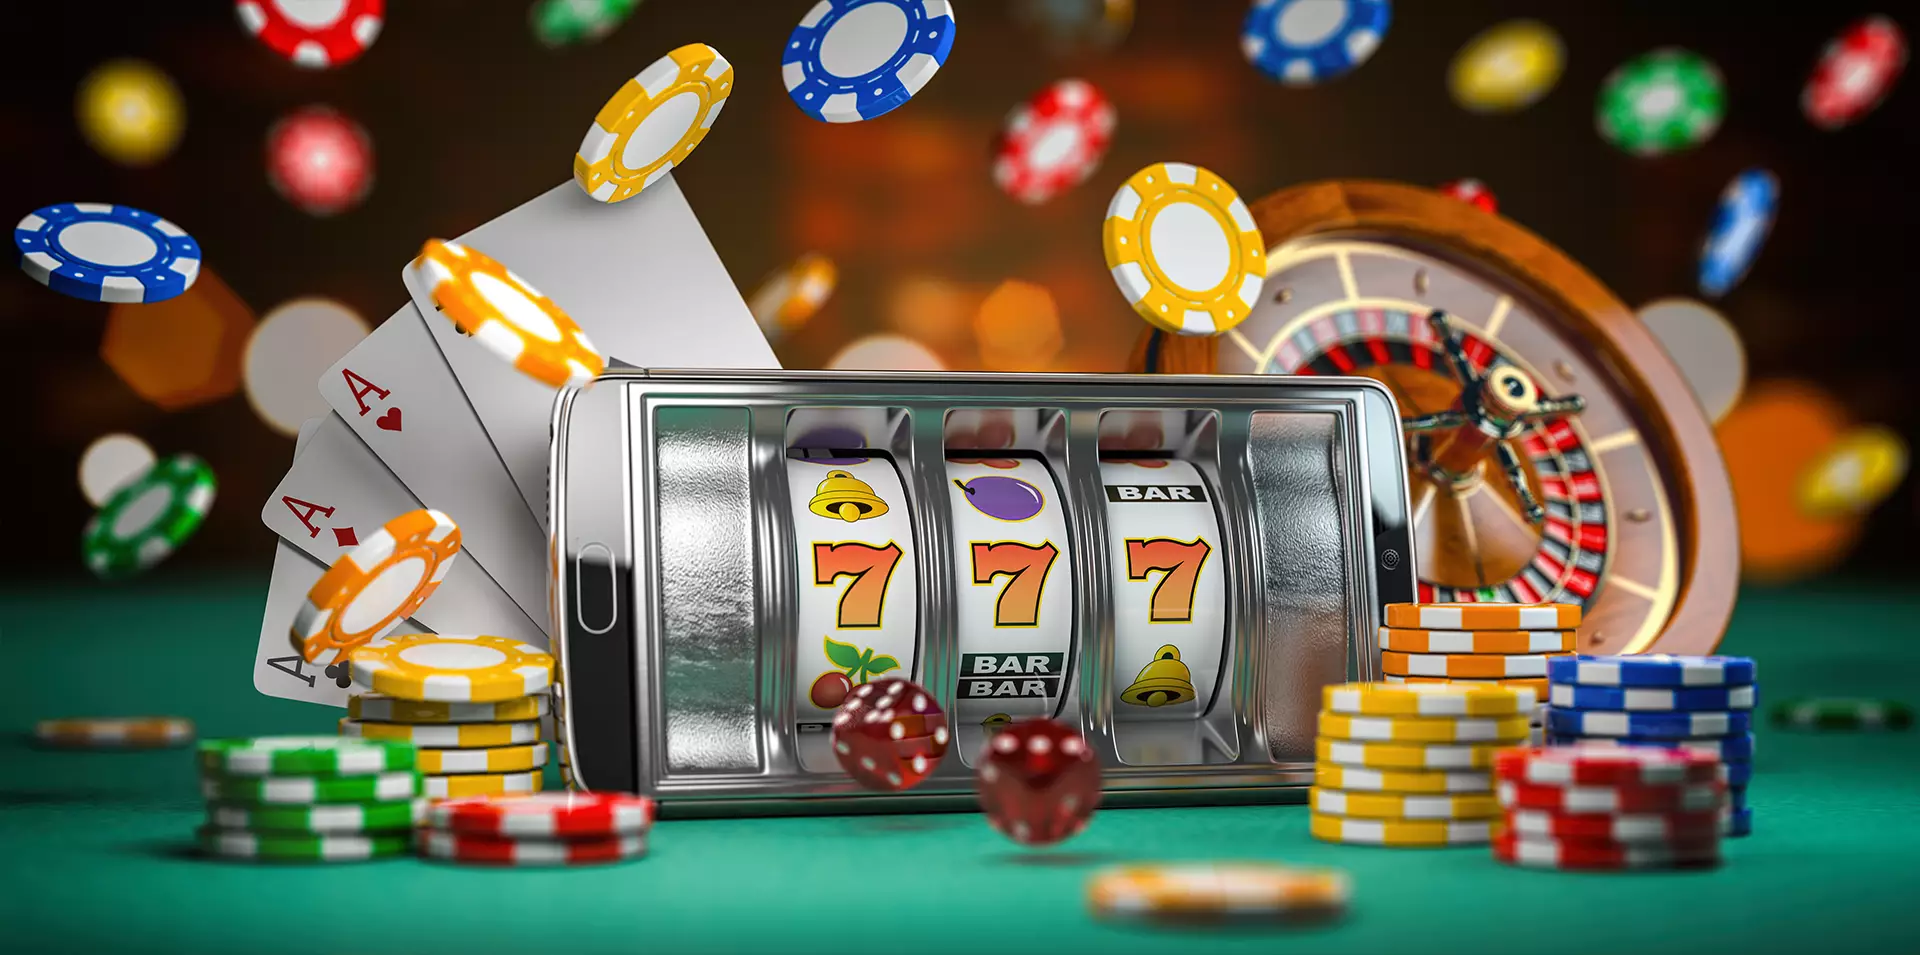 Customer Experience in Gaming and Gambling Industry